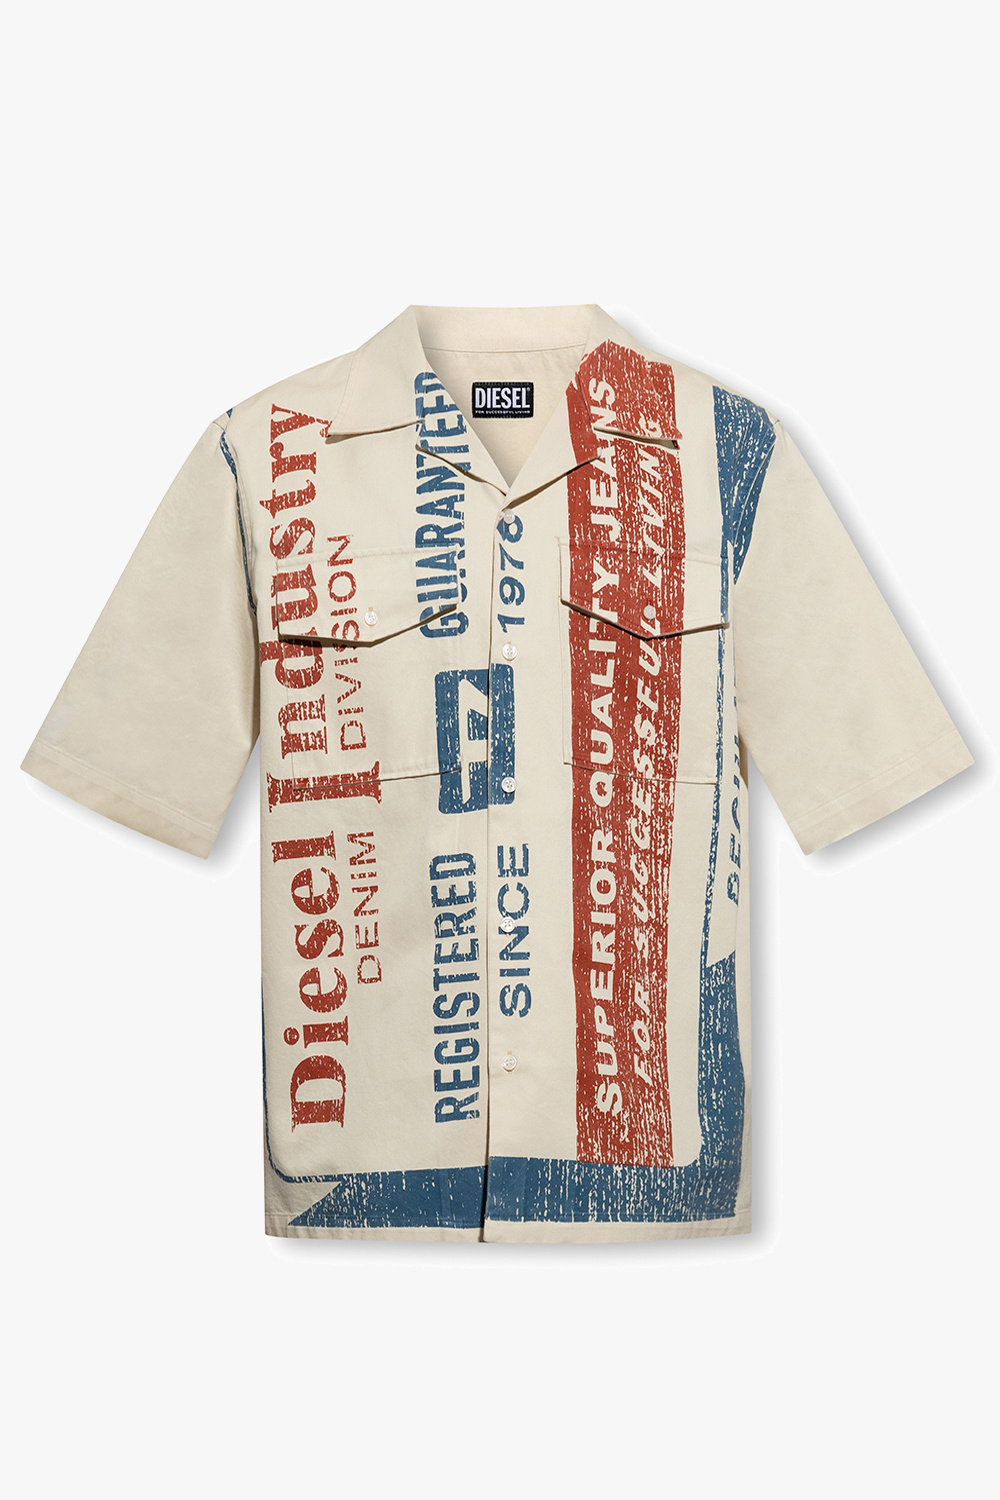 StclaircomoShops | Universal Works Garage Long Sleeve Cotton Blend comfortable Shirt | Clothing | Diesel 'captures transitional styling of the moment the Britt sweater vest